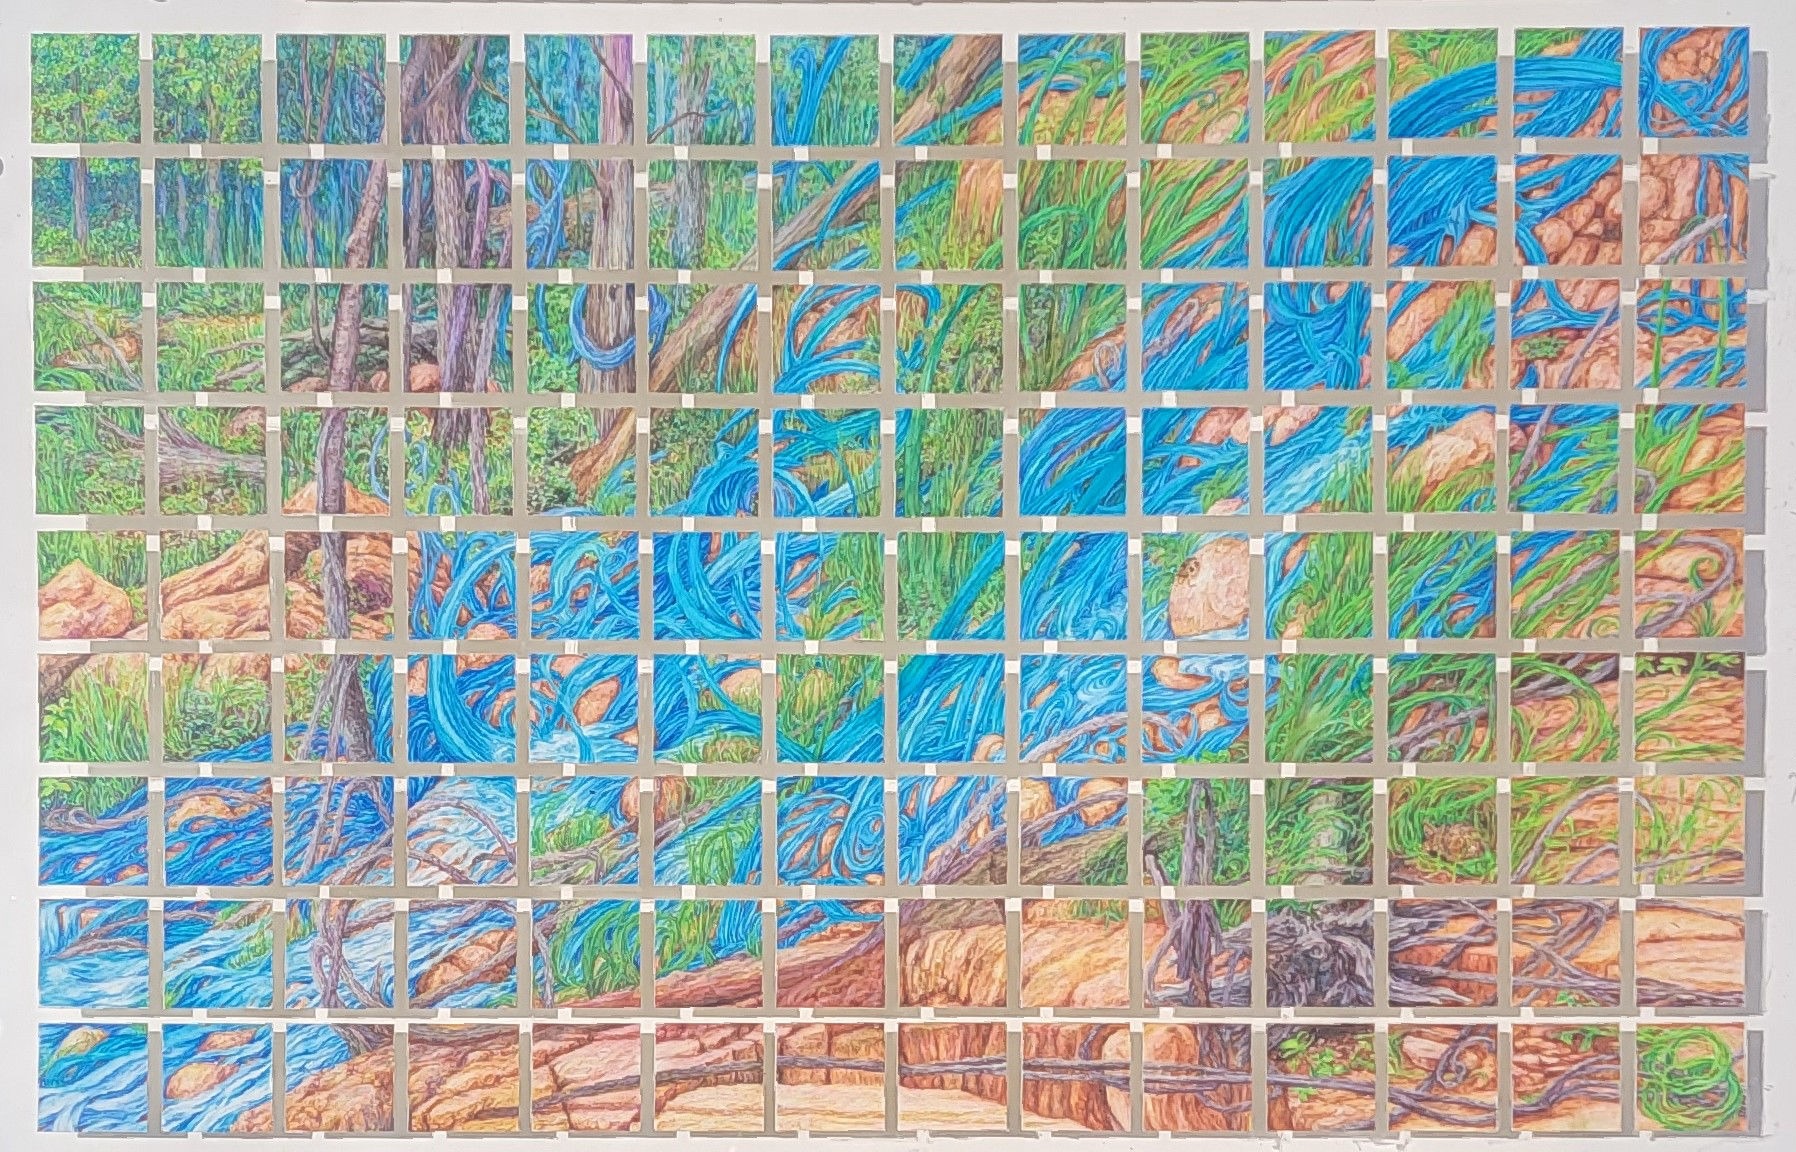 painting done in a grid with rocks plants and abstract water